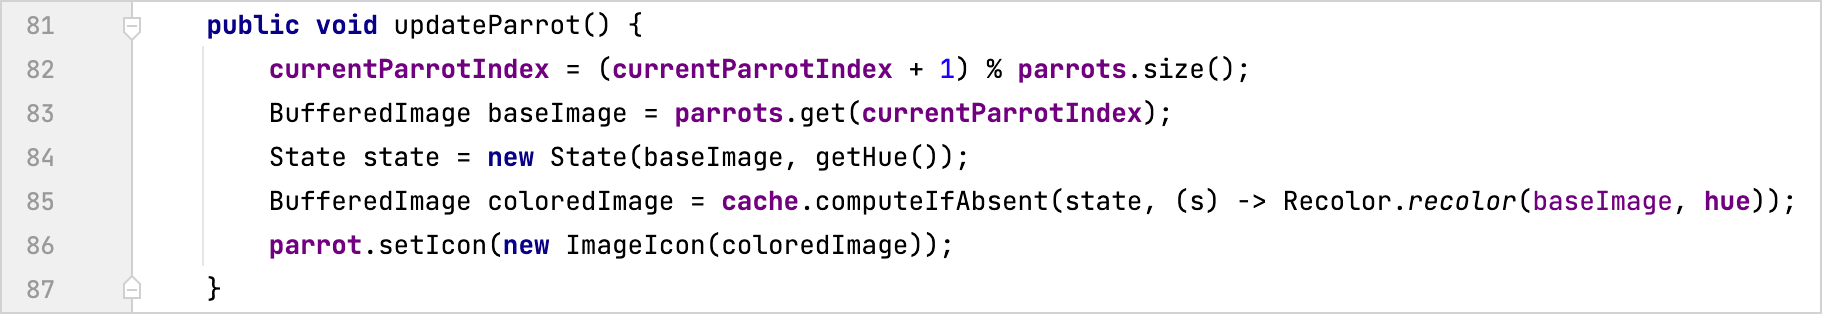 The implementation of the updateParrot() method